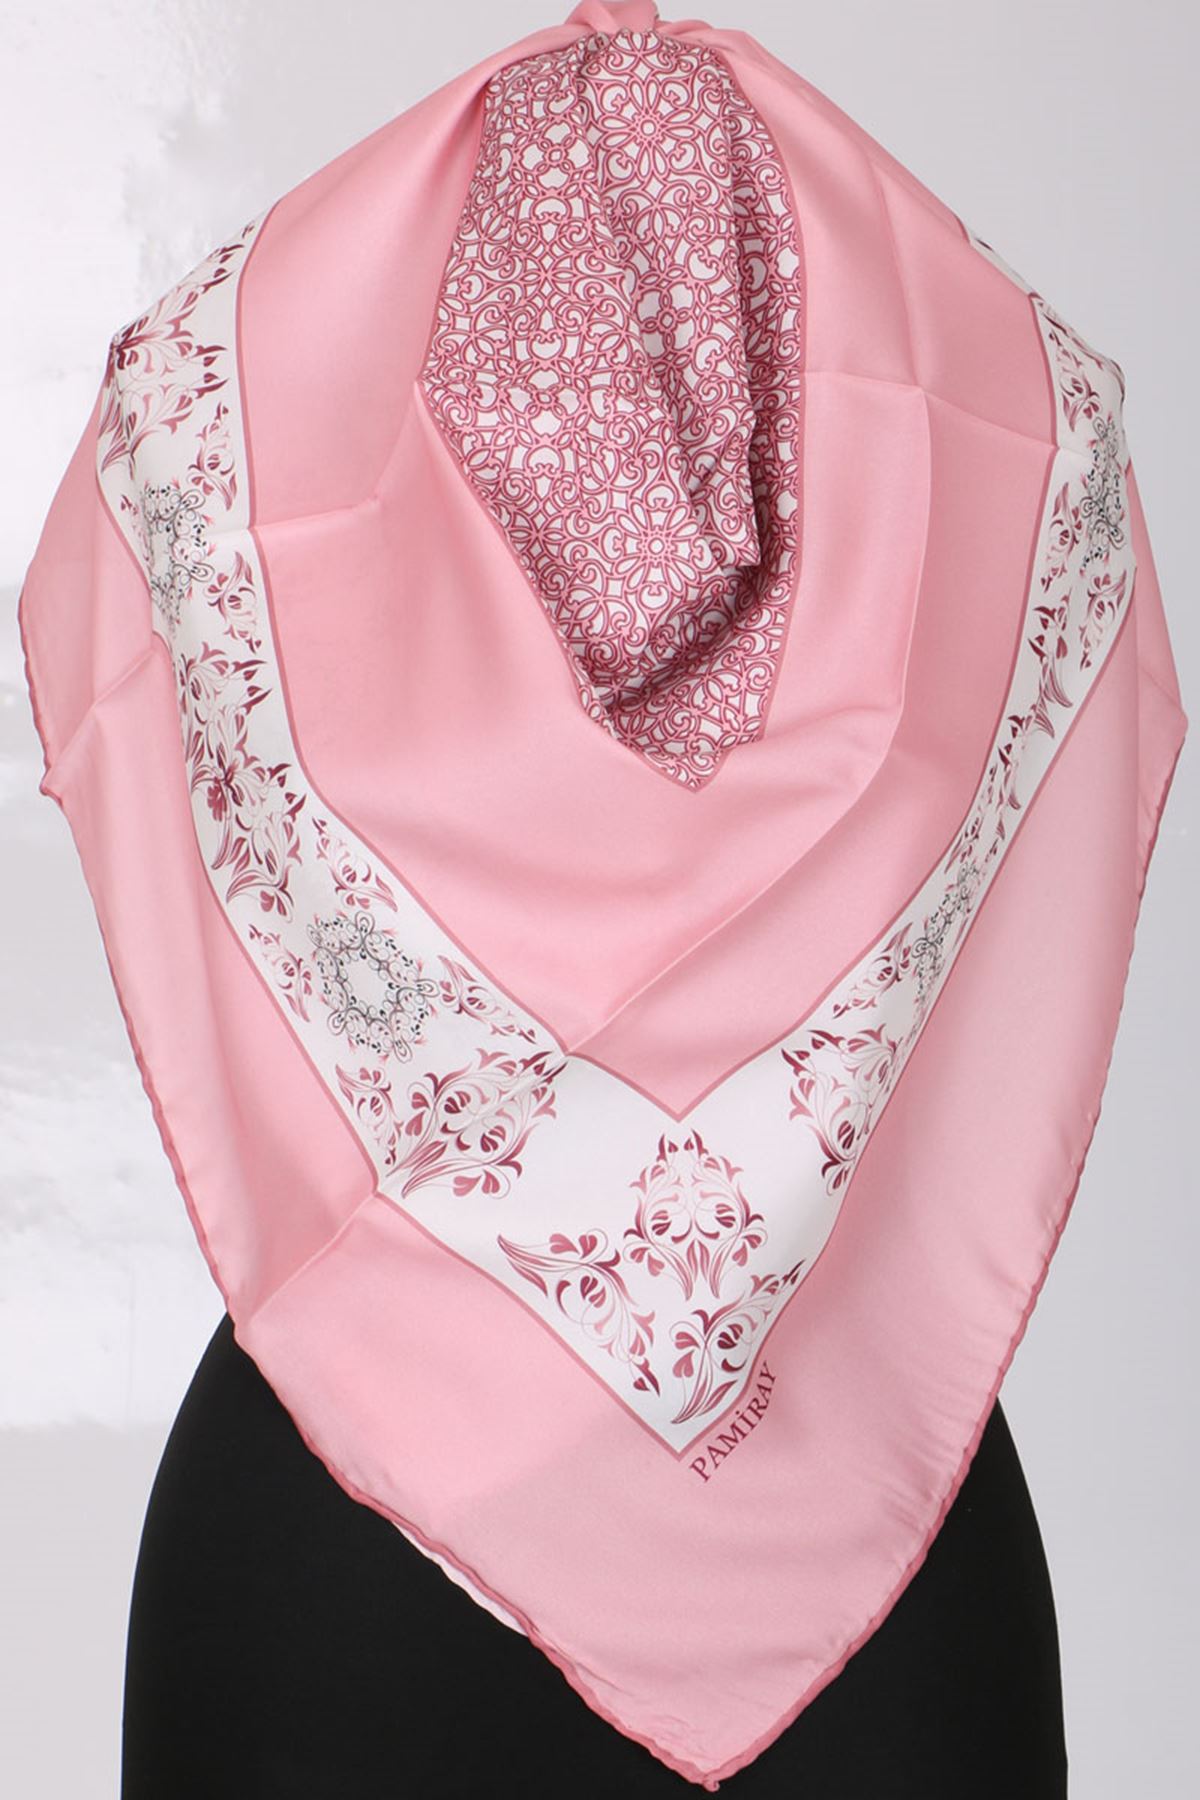 17127 Ethnic Patterned Rayon Scarf - Dusty Rose